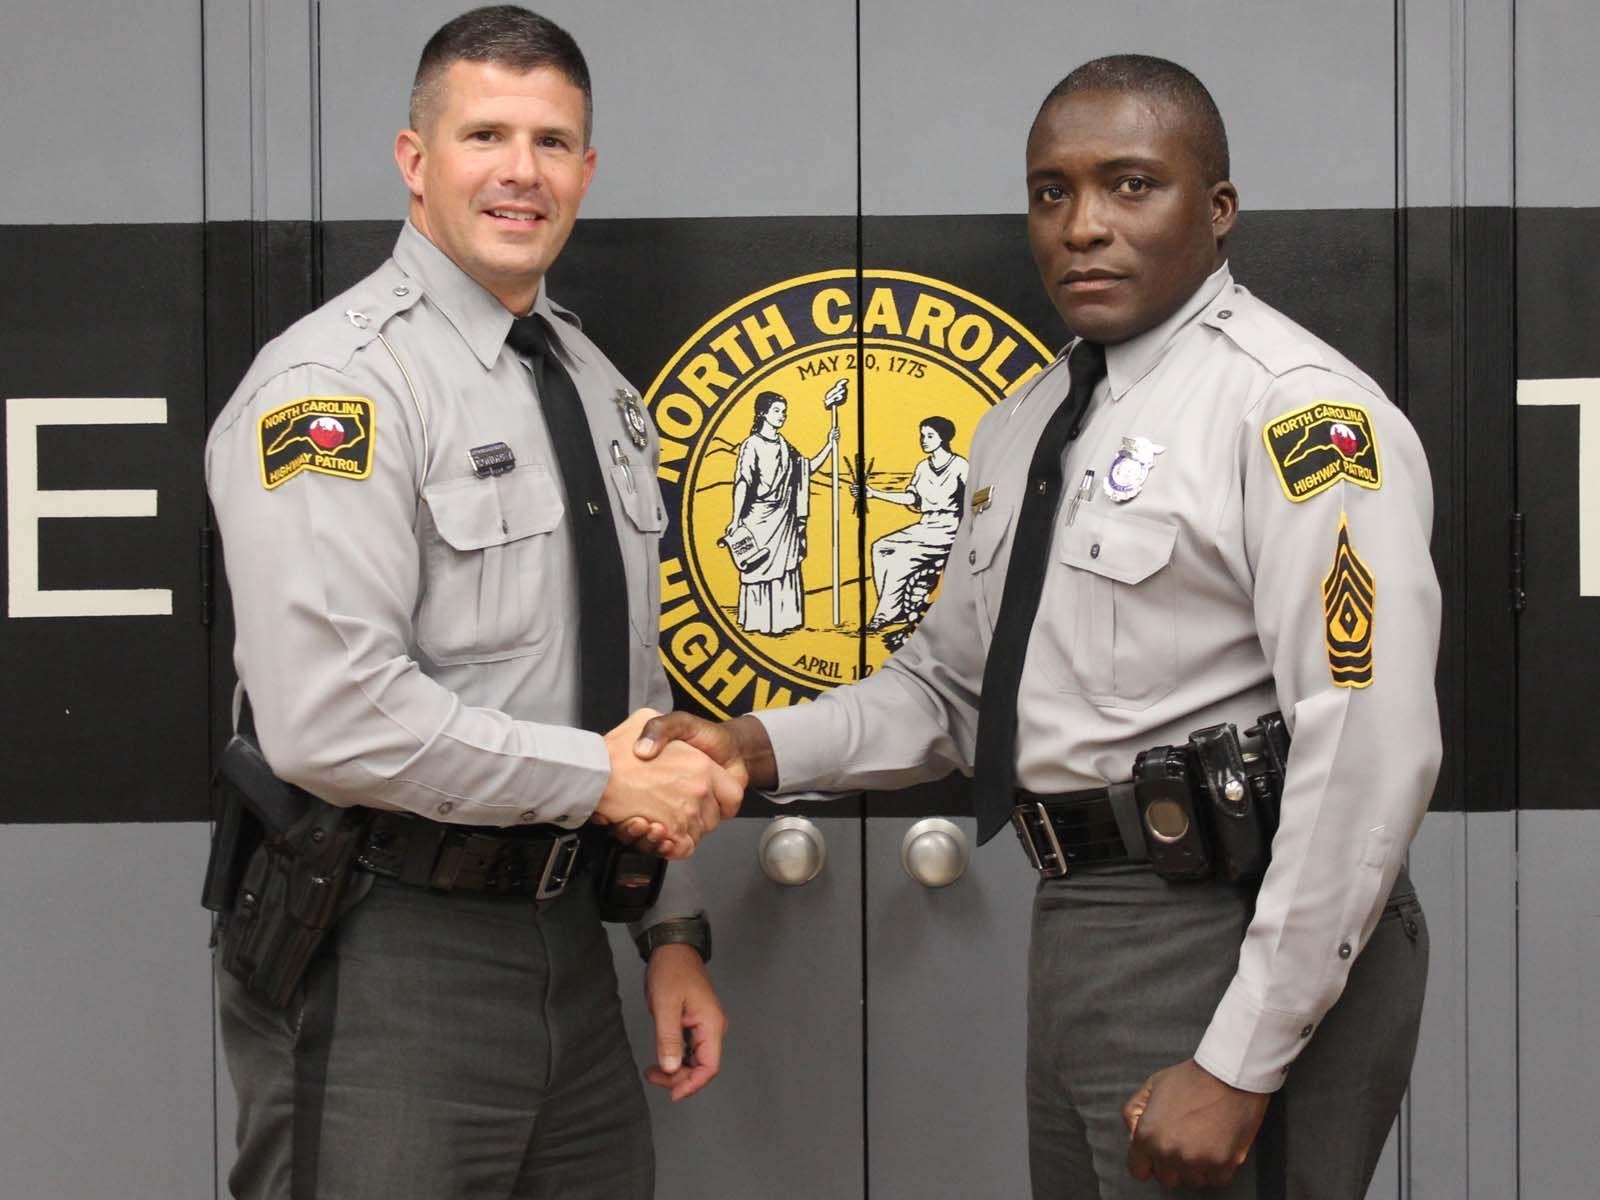 District Highway Patrol First Sgt Retires After 25 Years